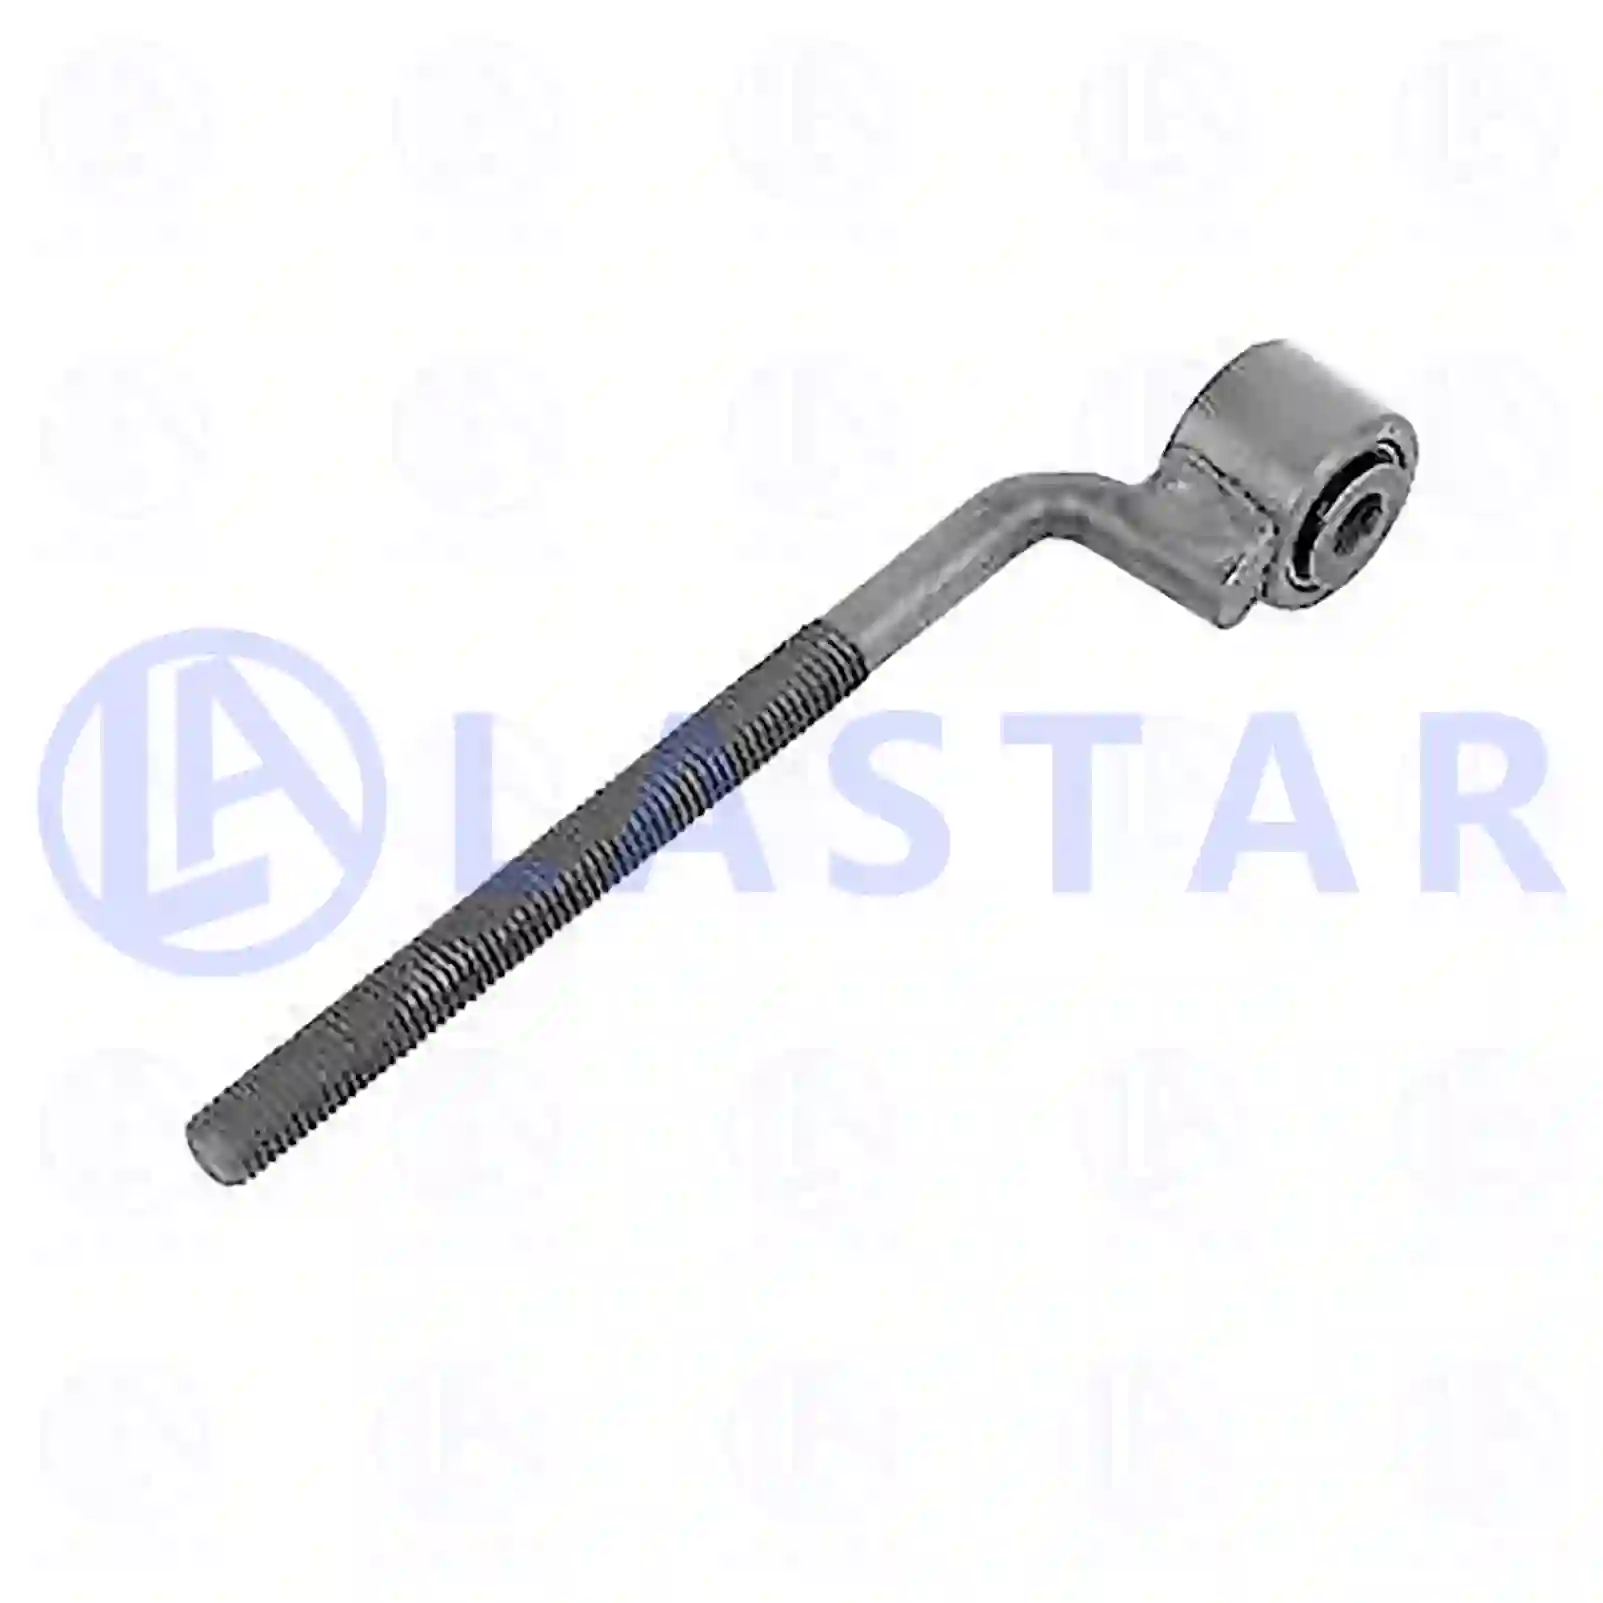 Clamping screw, 77711590, 3521502472 ||  77711590 Lastar Spare Part | Truck Spare Parts, Auotomotive Spare Parts Clamping screw, 77711590, 3521502472 ||  77711590 Lastar Spare Part | Truck Spare Parts, Auotomotive Spare Parts